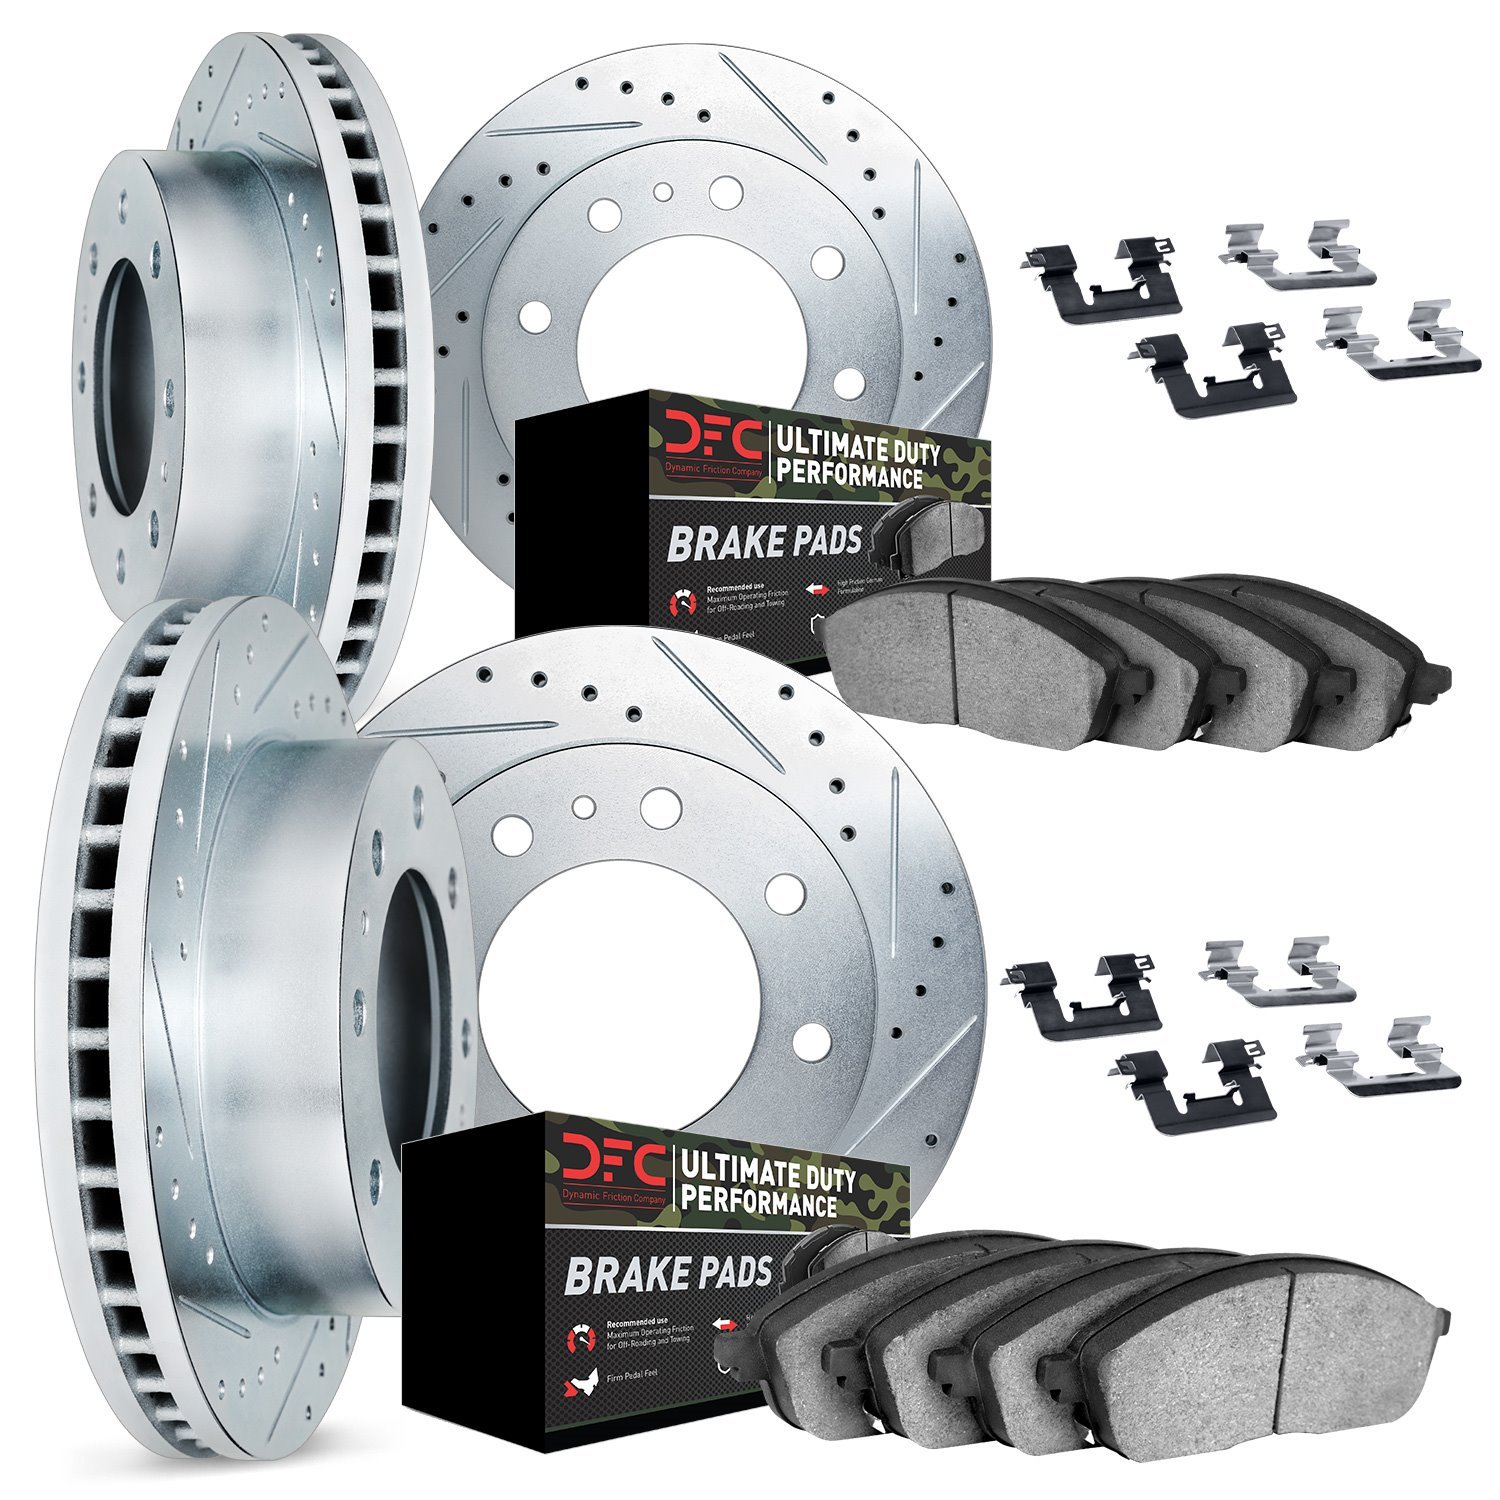 7414-54053 Drilled/Slotted Brake Rotors with Ultimate-Duty Brake Pads Kit & Hardware [Silver], Fits Select Ford/Lincoln/Mercury/